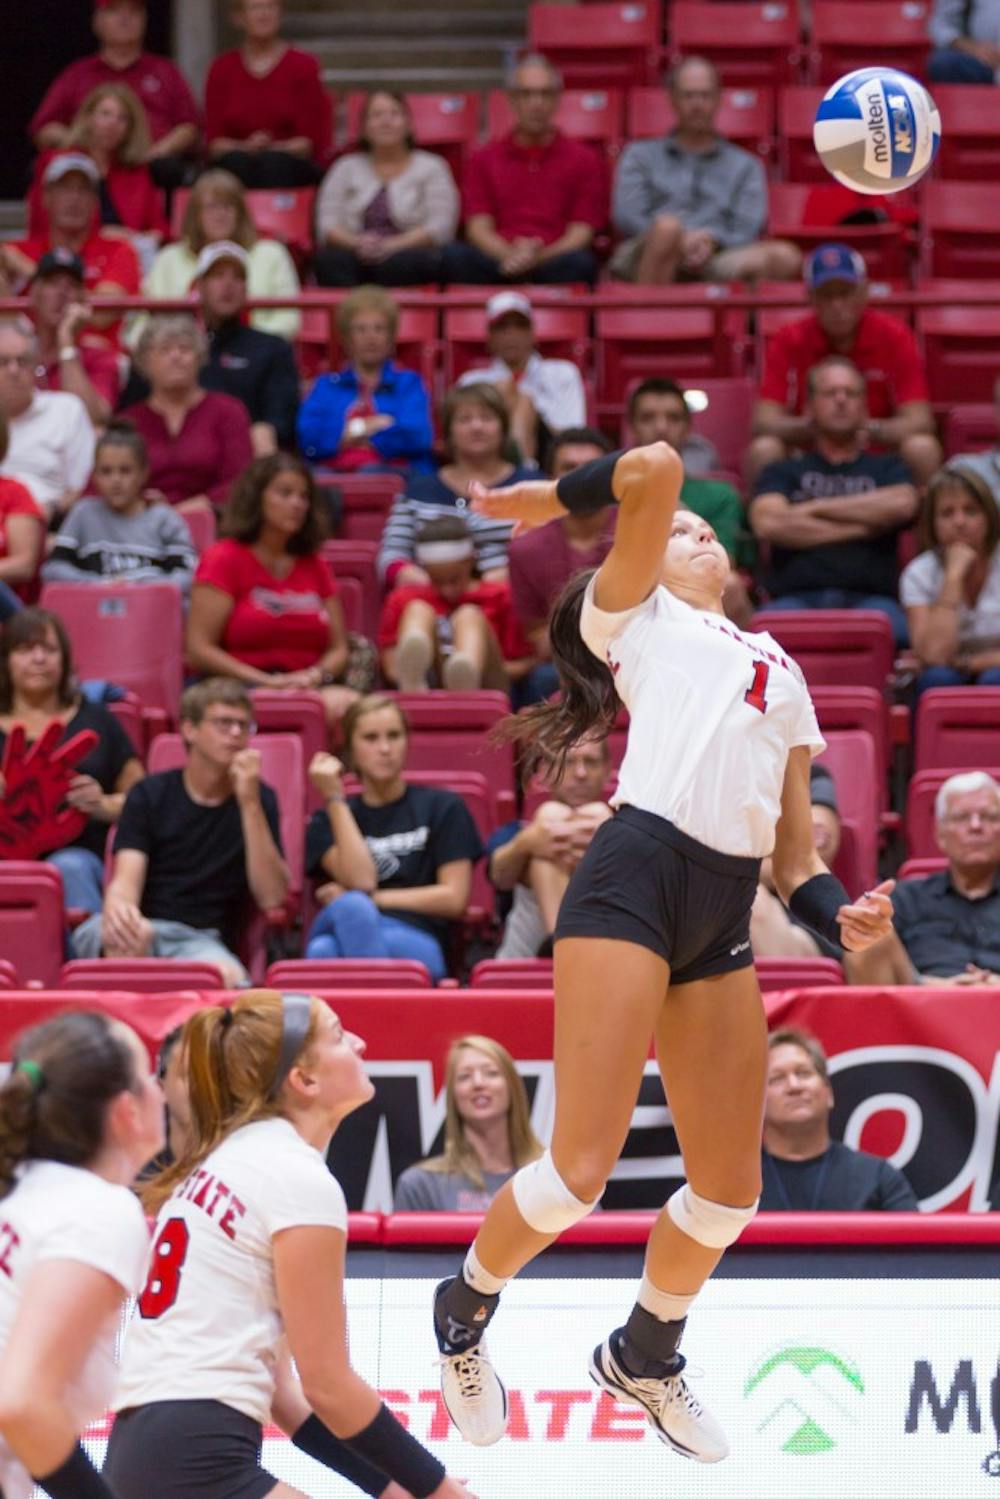 Senior outside hitter Mackenzie Kitchel jumps up to spike the ball at the game against Valparaiso on Sept. 16 at John E. Worthen Arena. Kyle Crawford // DN